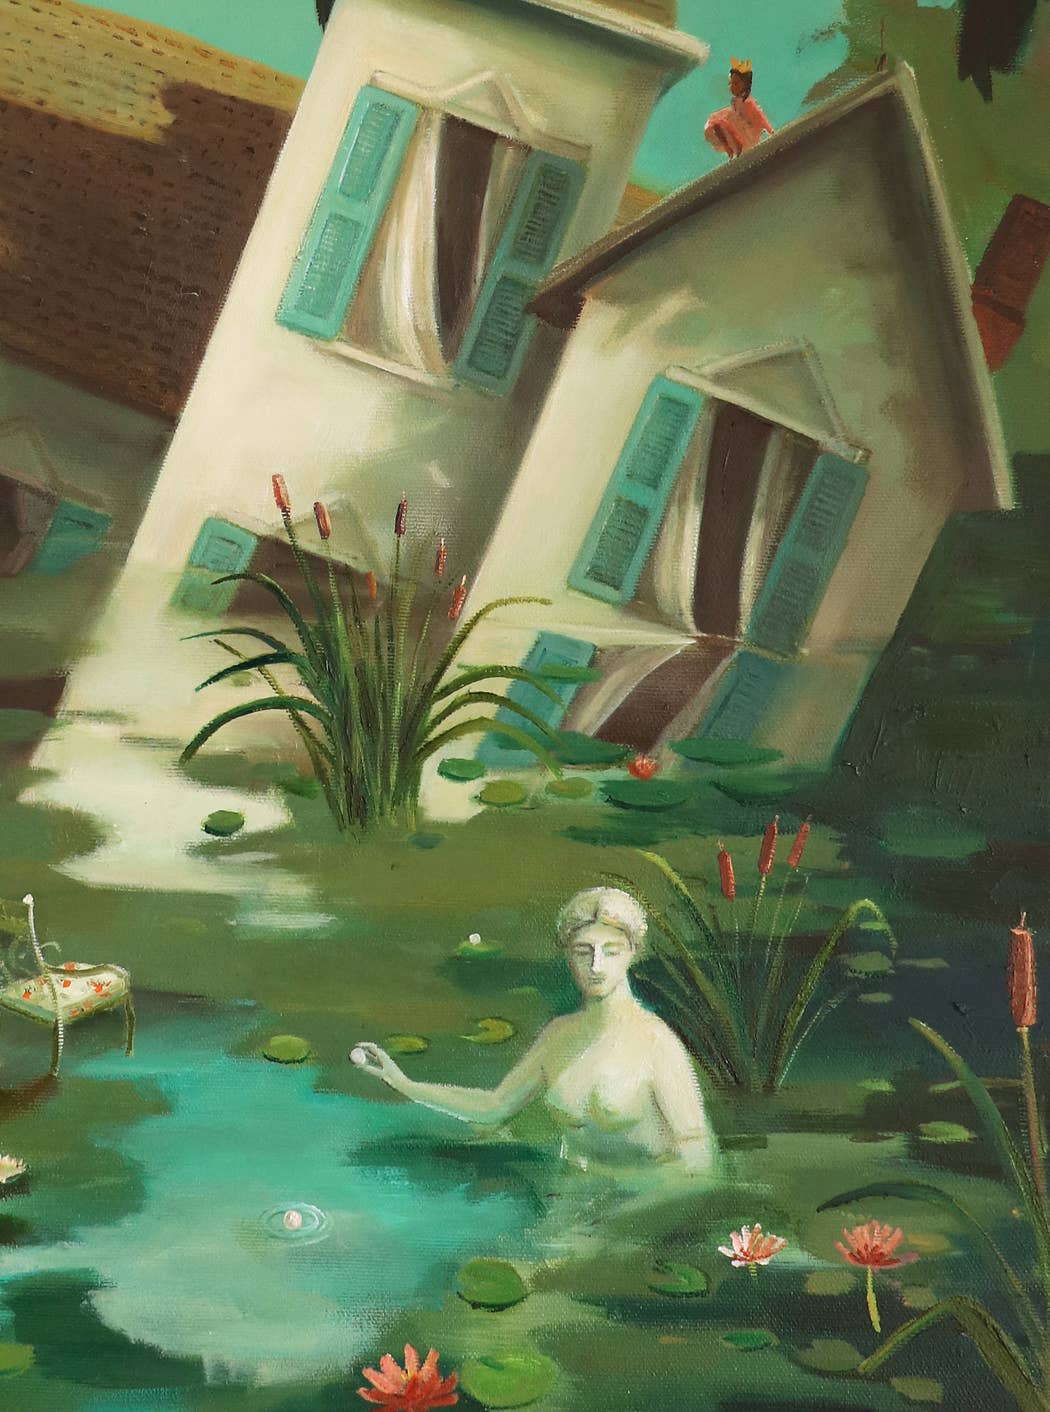 A Janet Hill fine art print depicting a surreal scene with a female figure standing near The Incredible Sinking House surrounded by palm trees and a body of water, with a swan nearby.